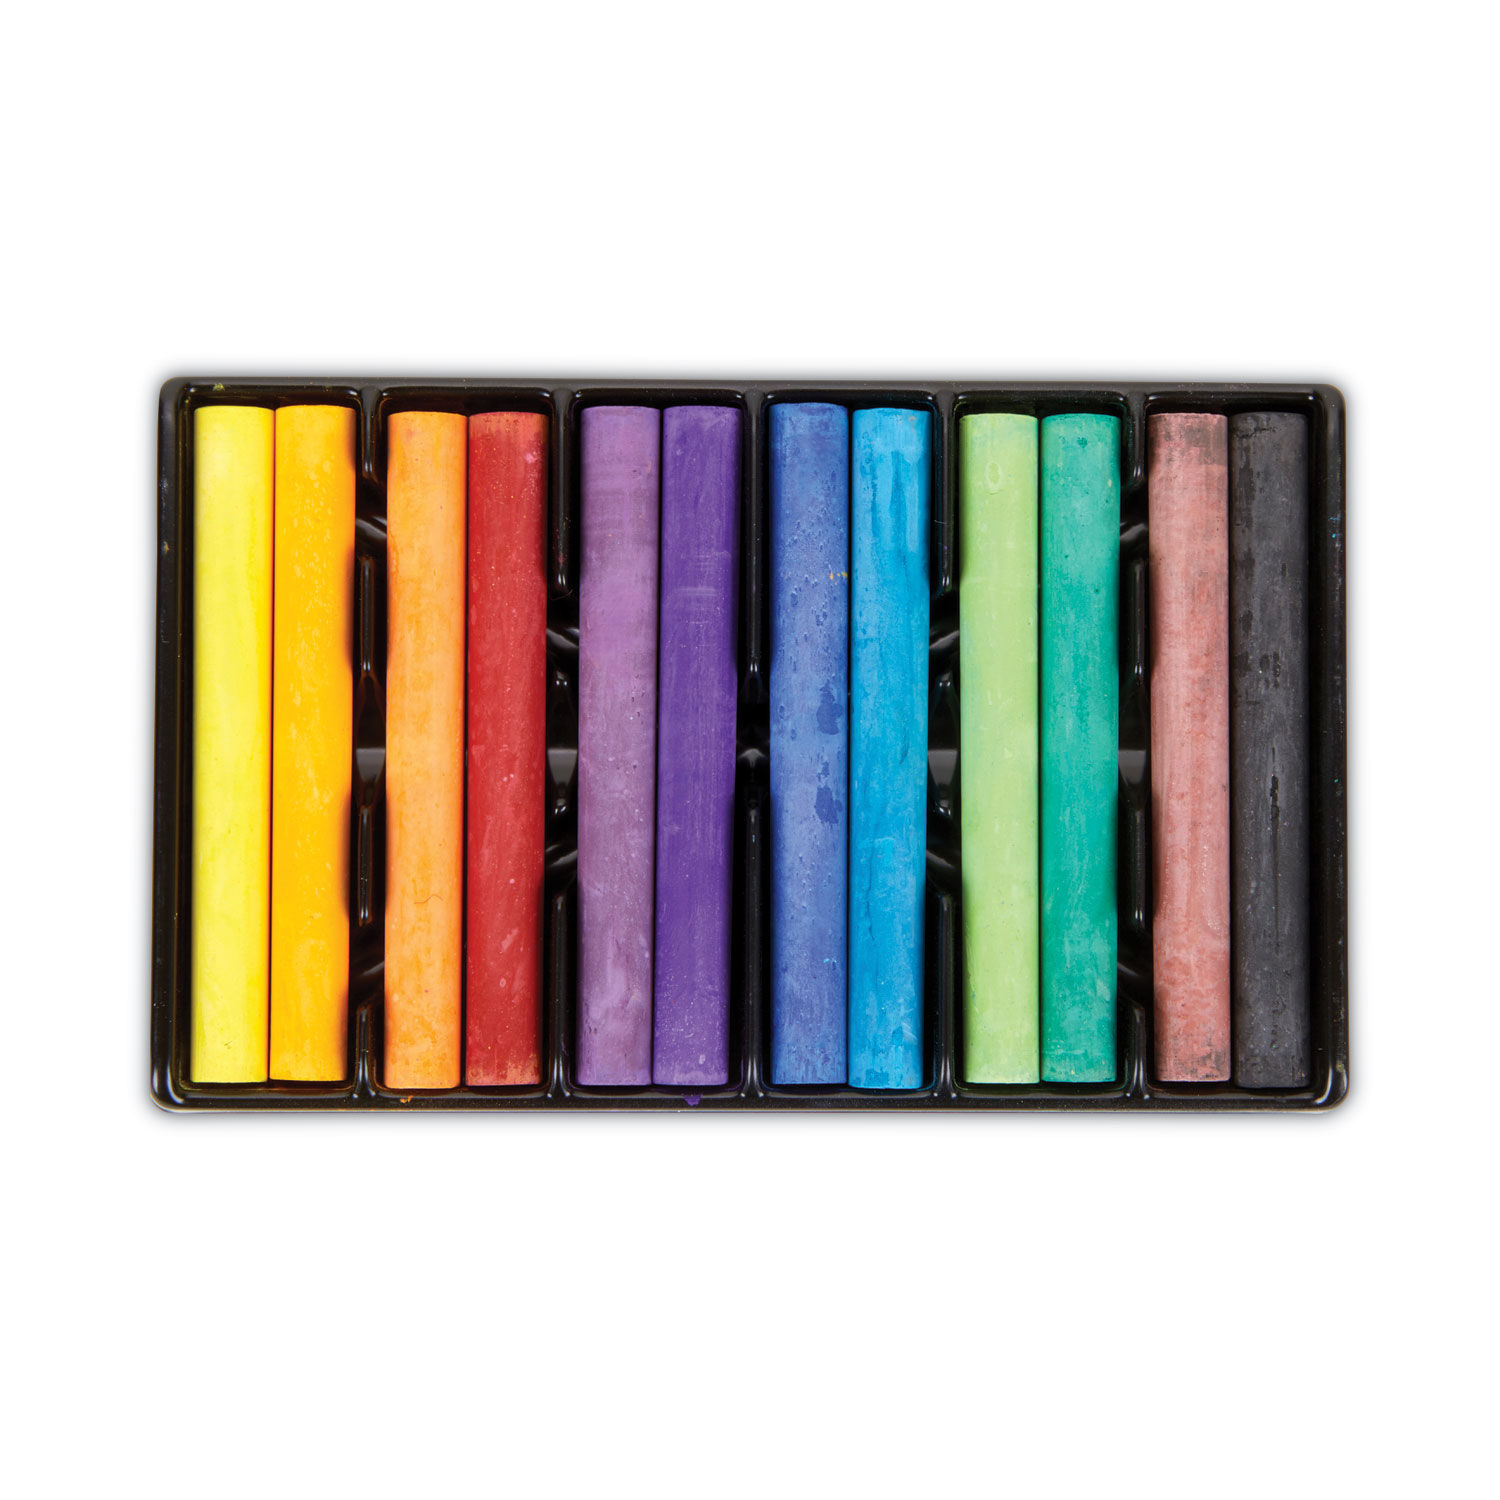 Classic Color Crayons in Flip-Top Pack with Sharpener, 64 Colors